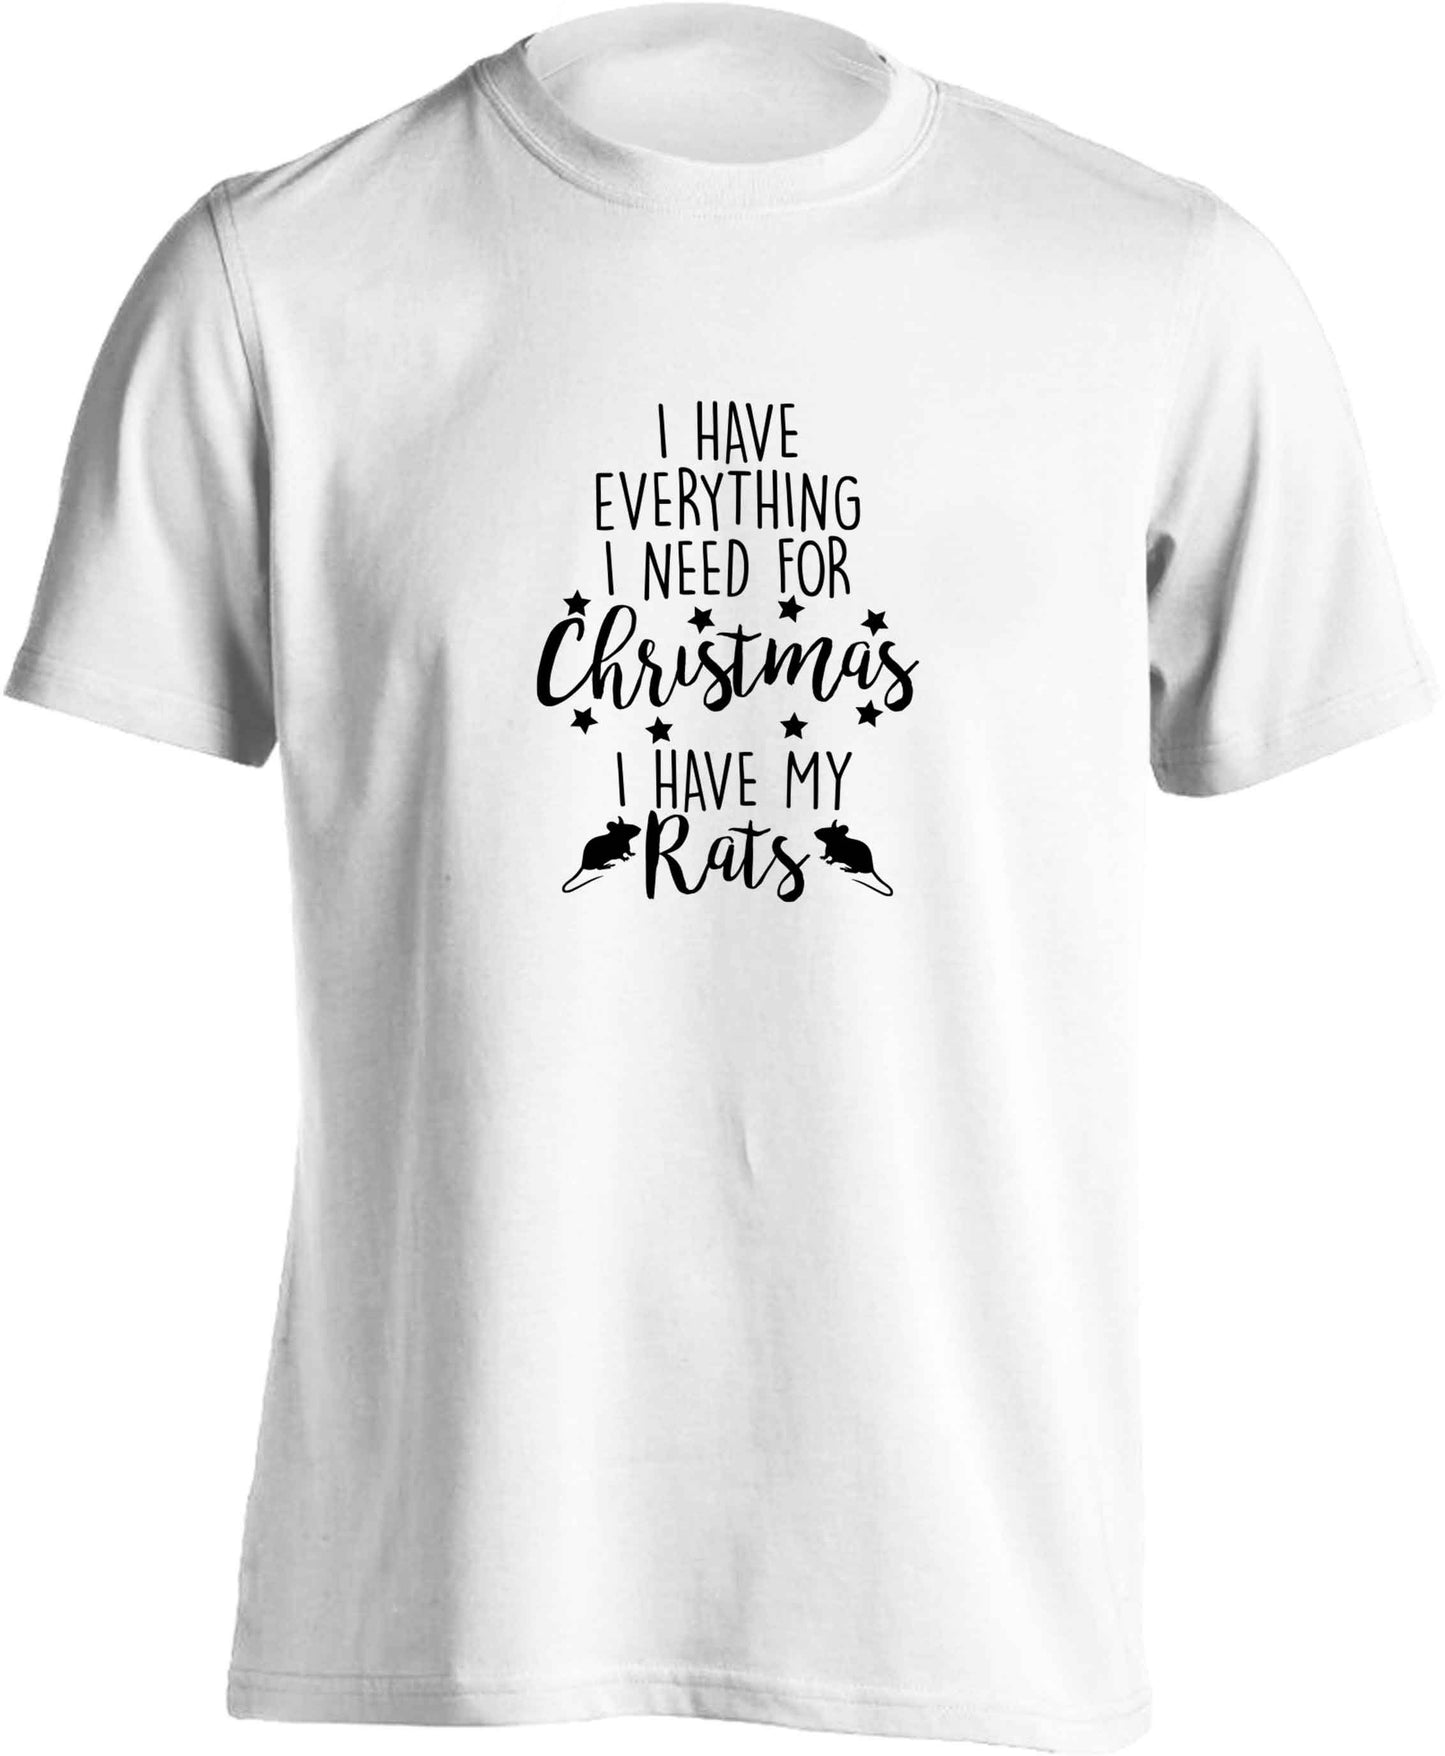 I have everything I need for Christmas I have my rats adults unisex white Tshirt 2XL